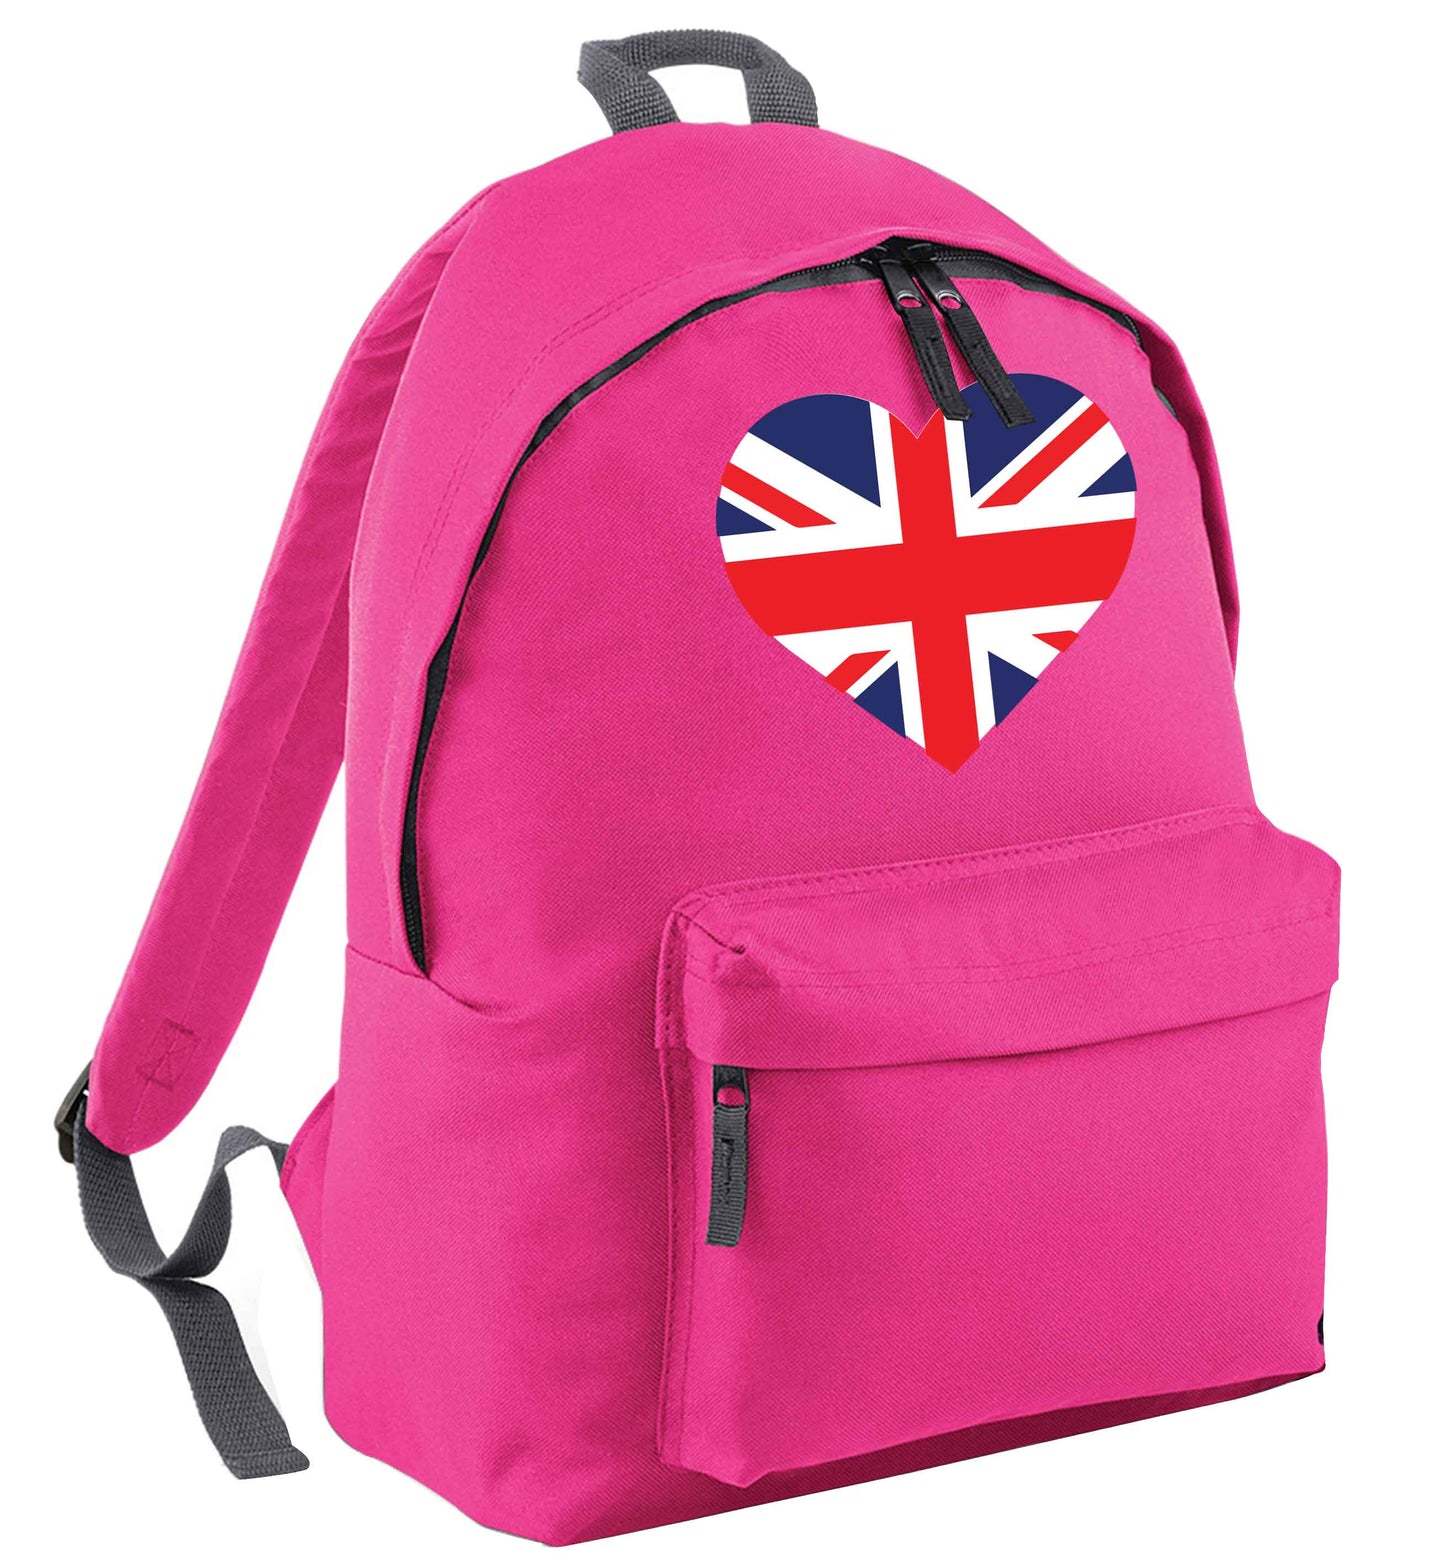 Union Jack Heart pink adults backpack